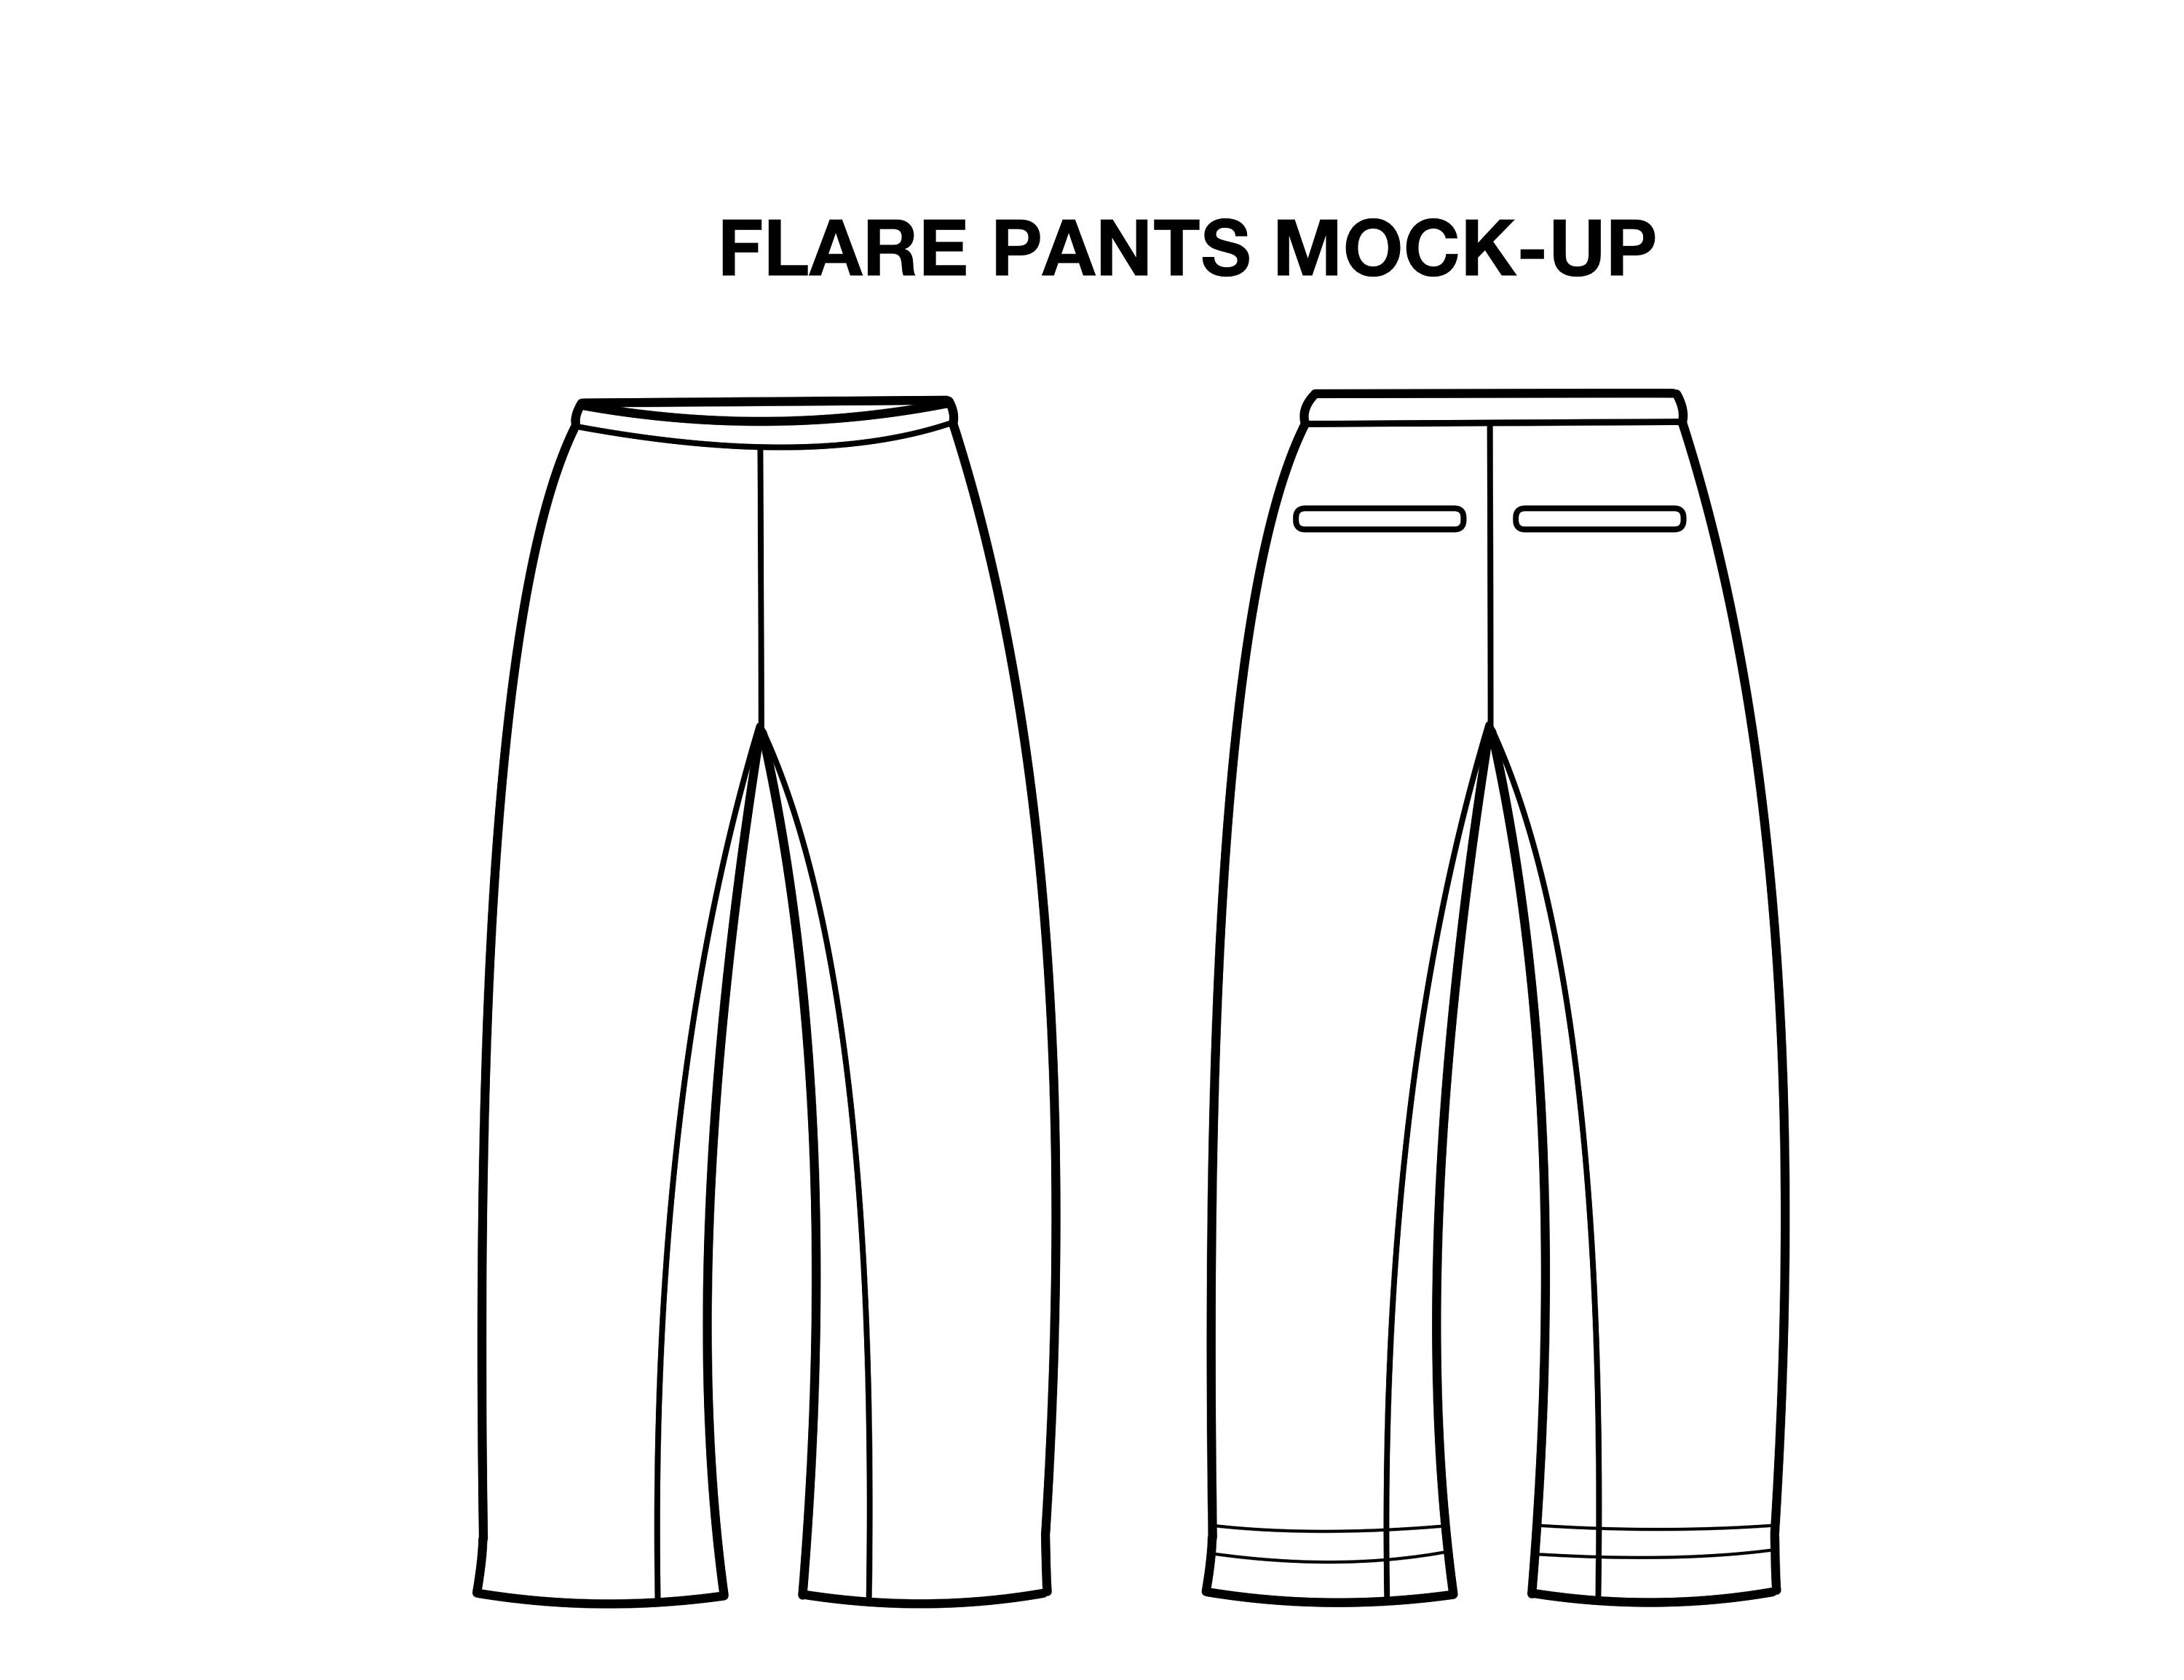 Unisex Flare Pants Flat Technical Drawing Illustration Blank Streetwear  Mock-up Template for Design and Tech Packs 